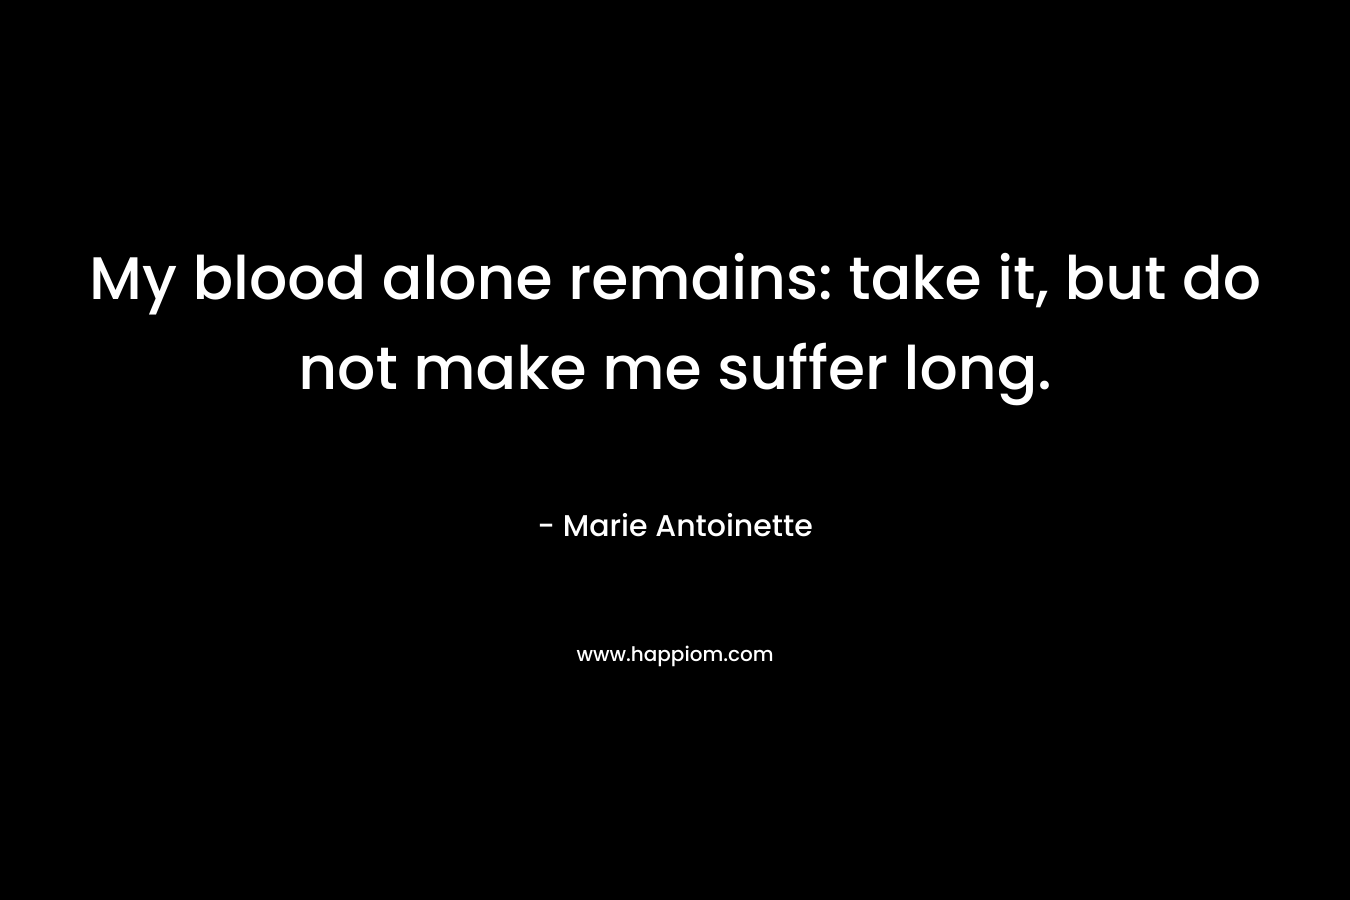 My blood alone remains: take it, but do not make me suffer long. – Marie Antoinette